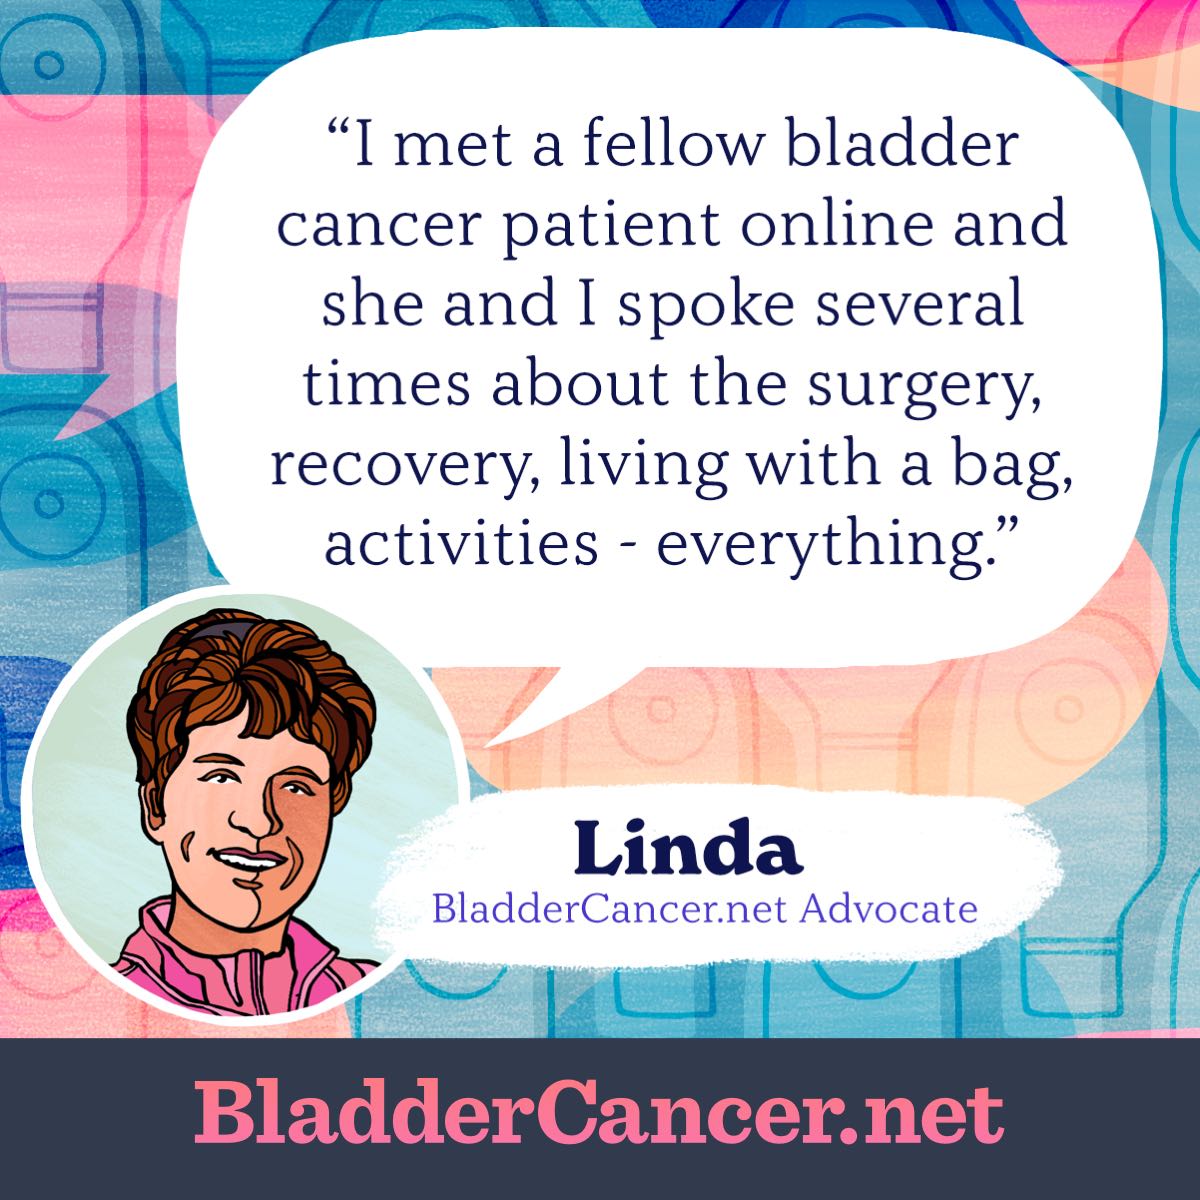 I met a fellow bladder cancer patient online and she and I spoke several times about the surgery, recovery, living with a bag, activities - everything. -Linda, BladderCancer.net Advocate